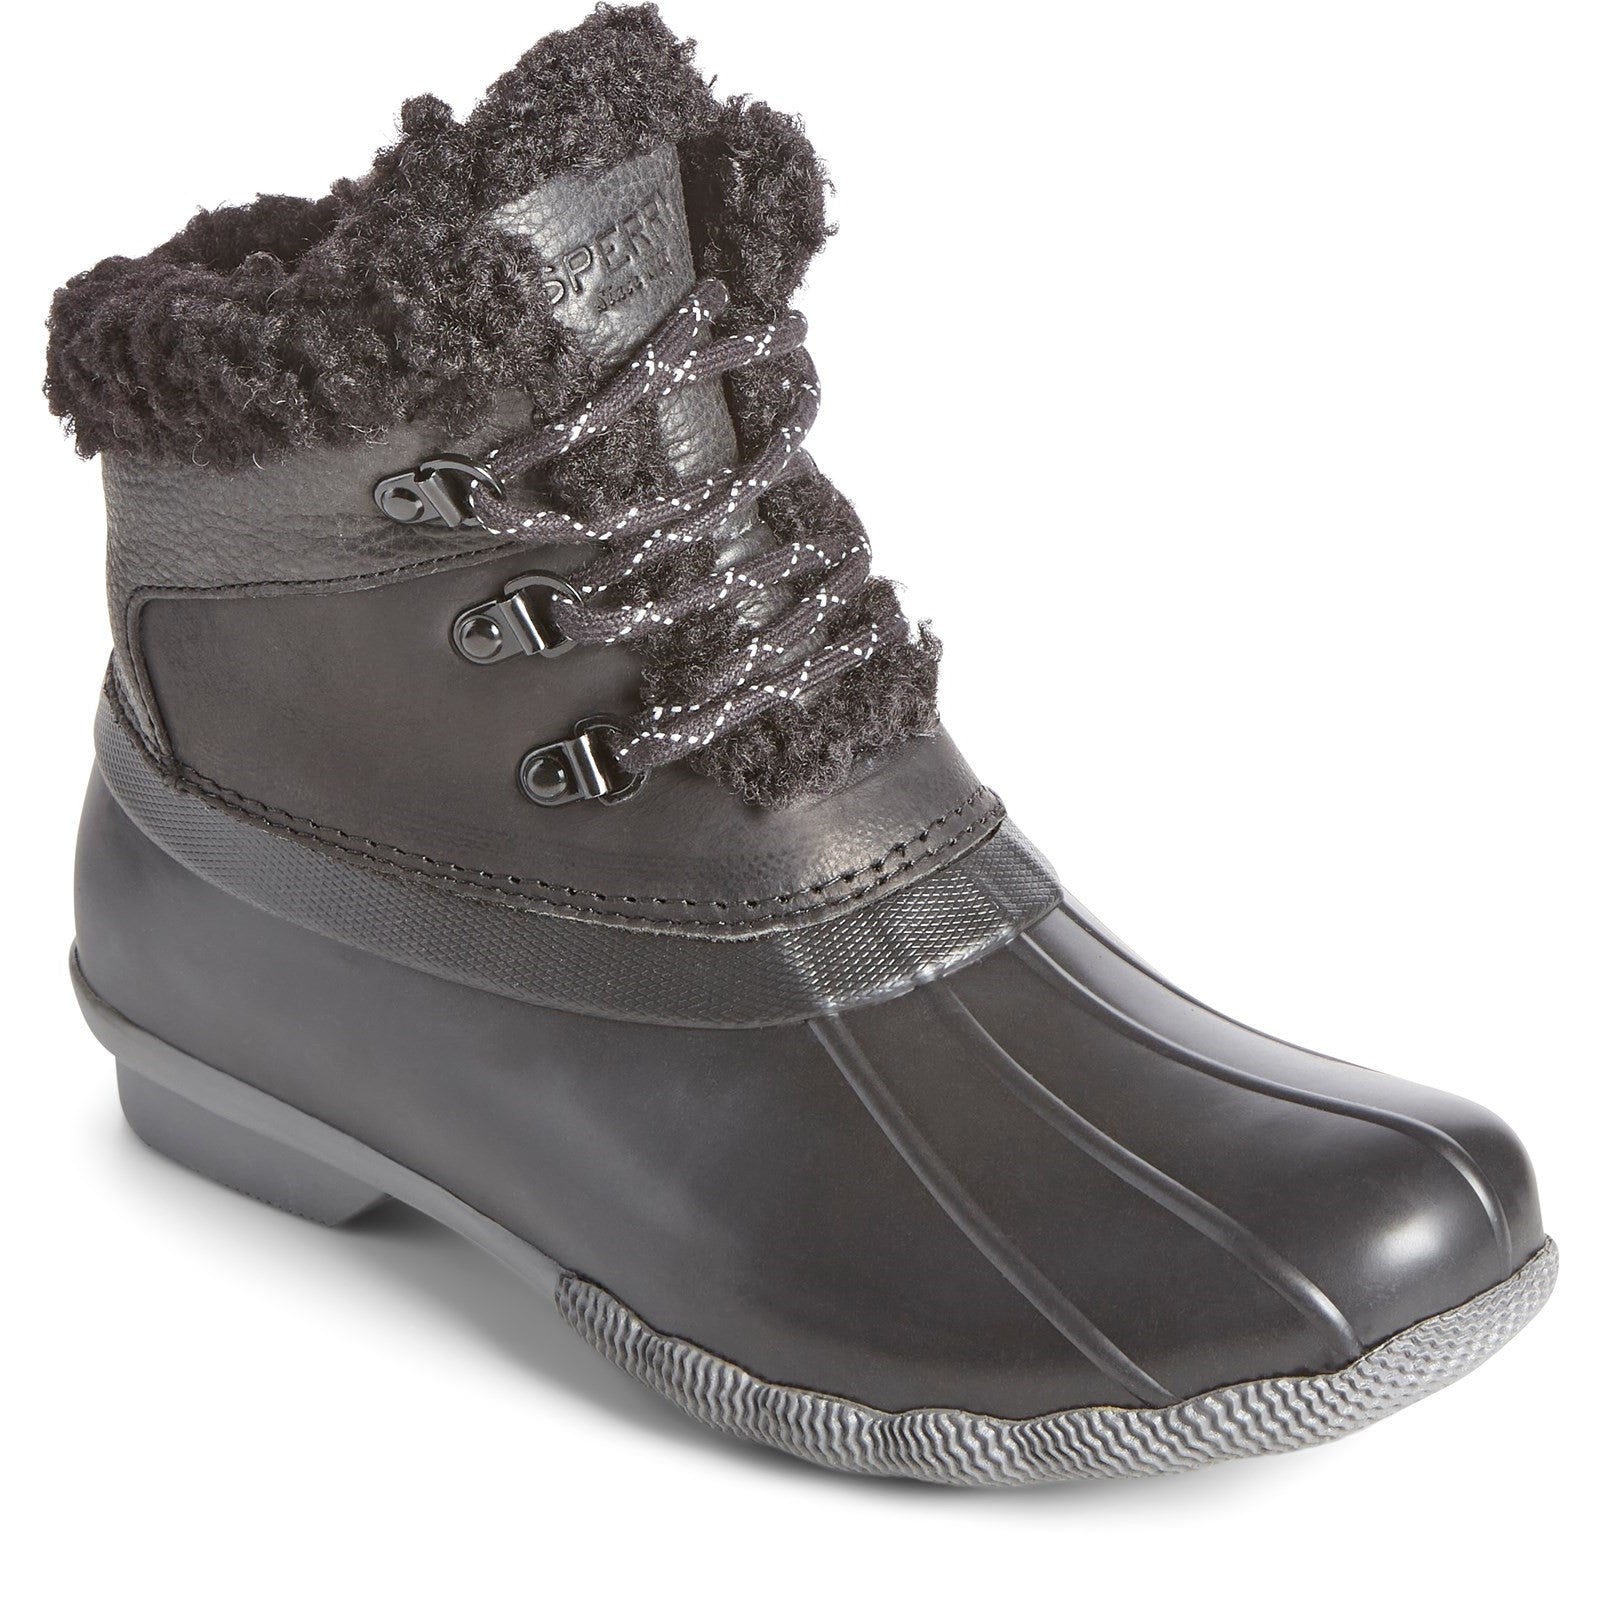 Sperry Womens Saltwater Alpine Ankle Boots - Black